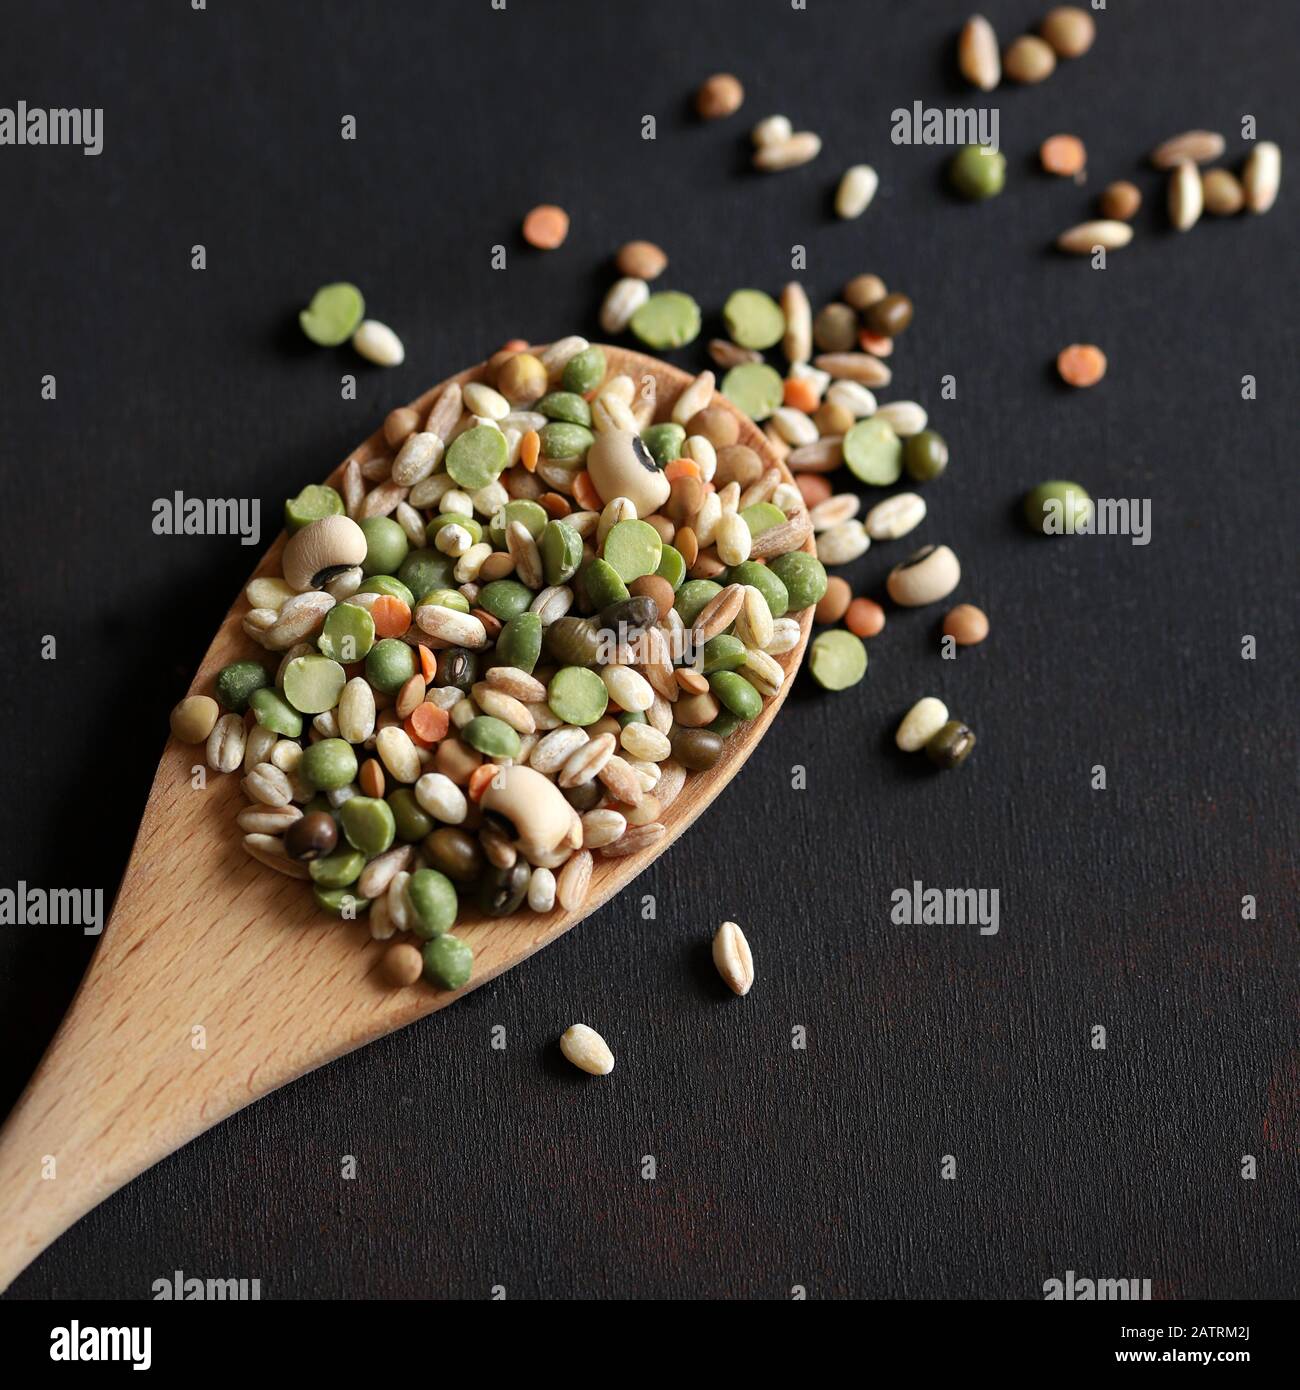 Mix of dried legumes in a wooden spoon isolated on dark background. Top view. Stock Photo